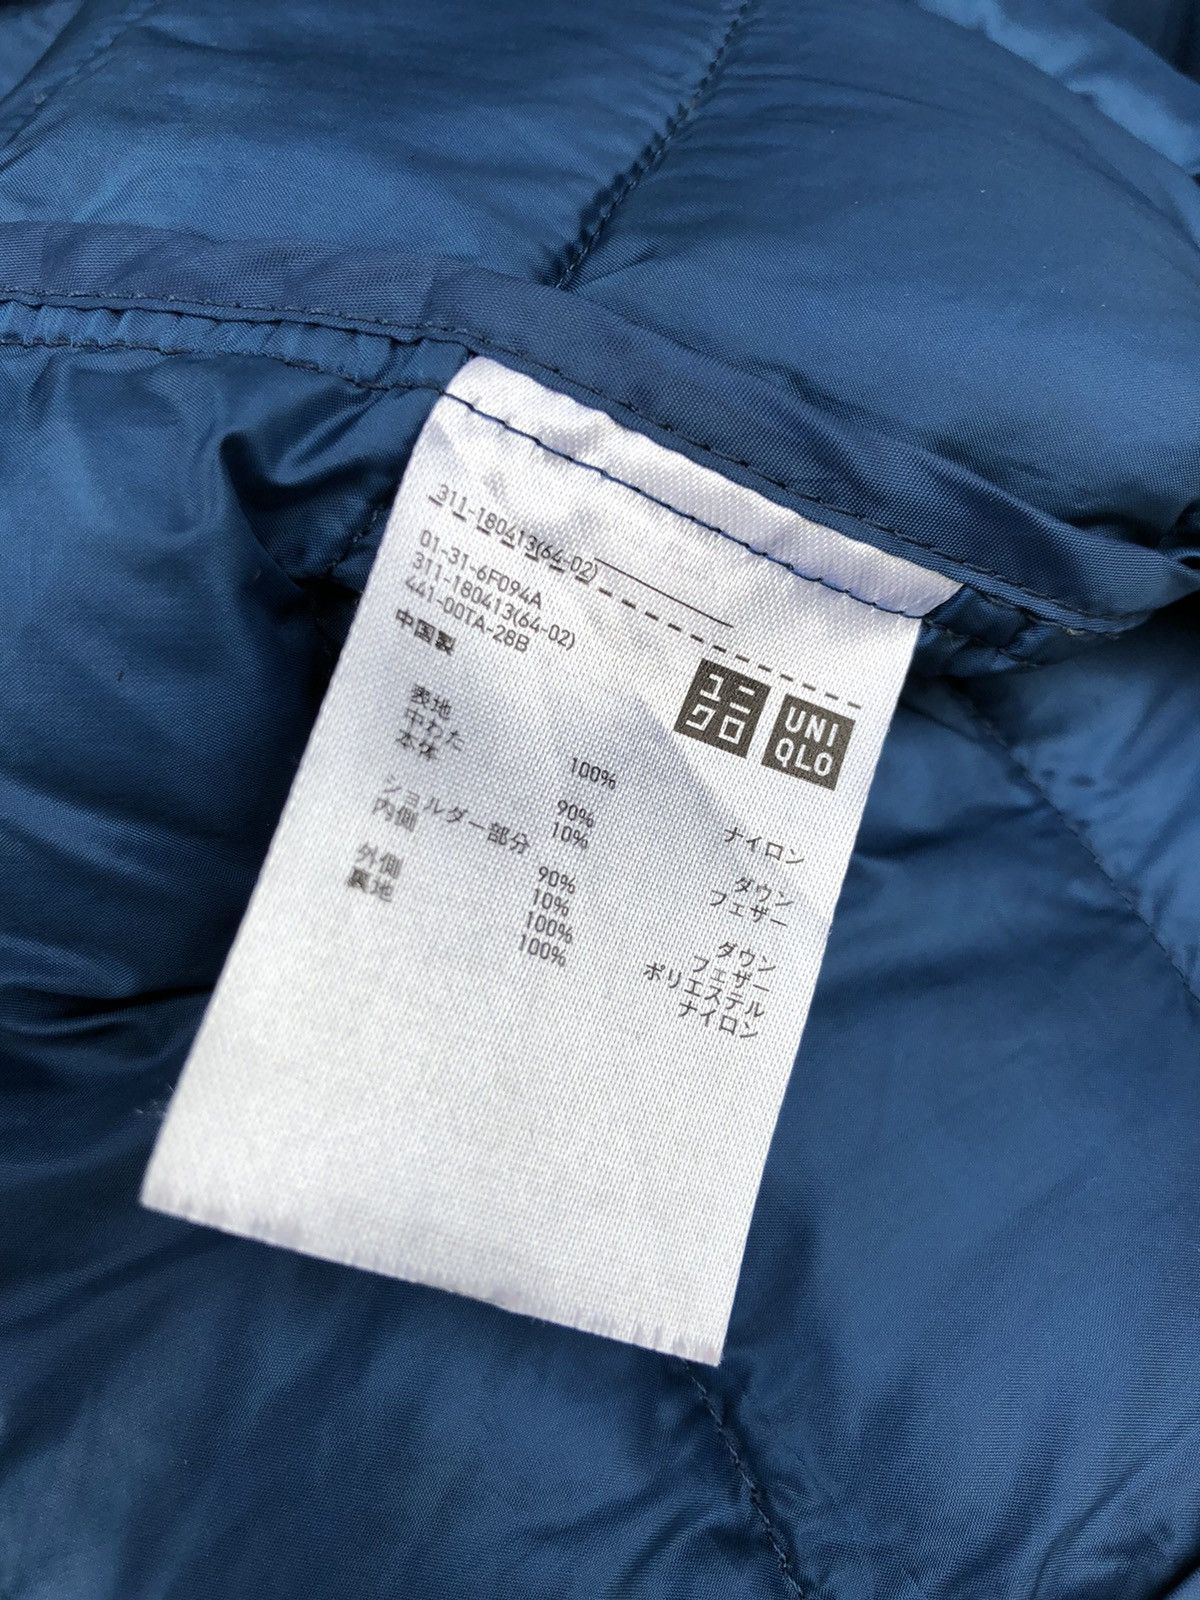 Uniqlo Puffer Quilted Jacket Size US S / EU 44-46 / 1 - 6 Preview